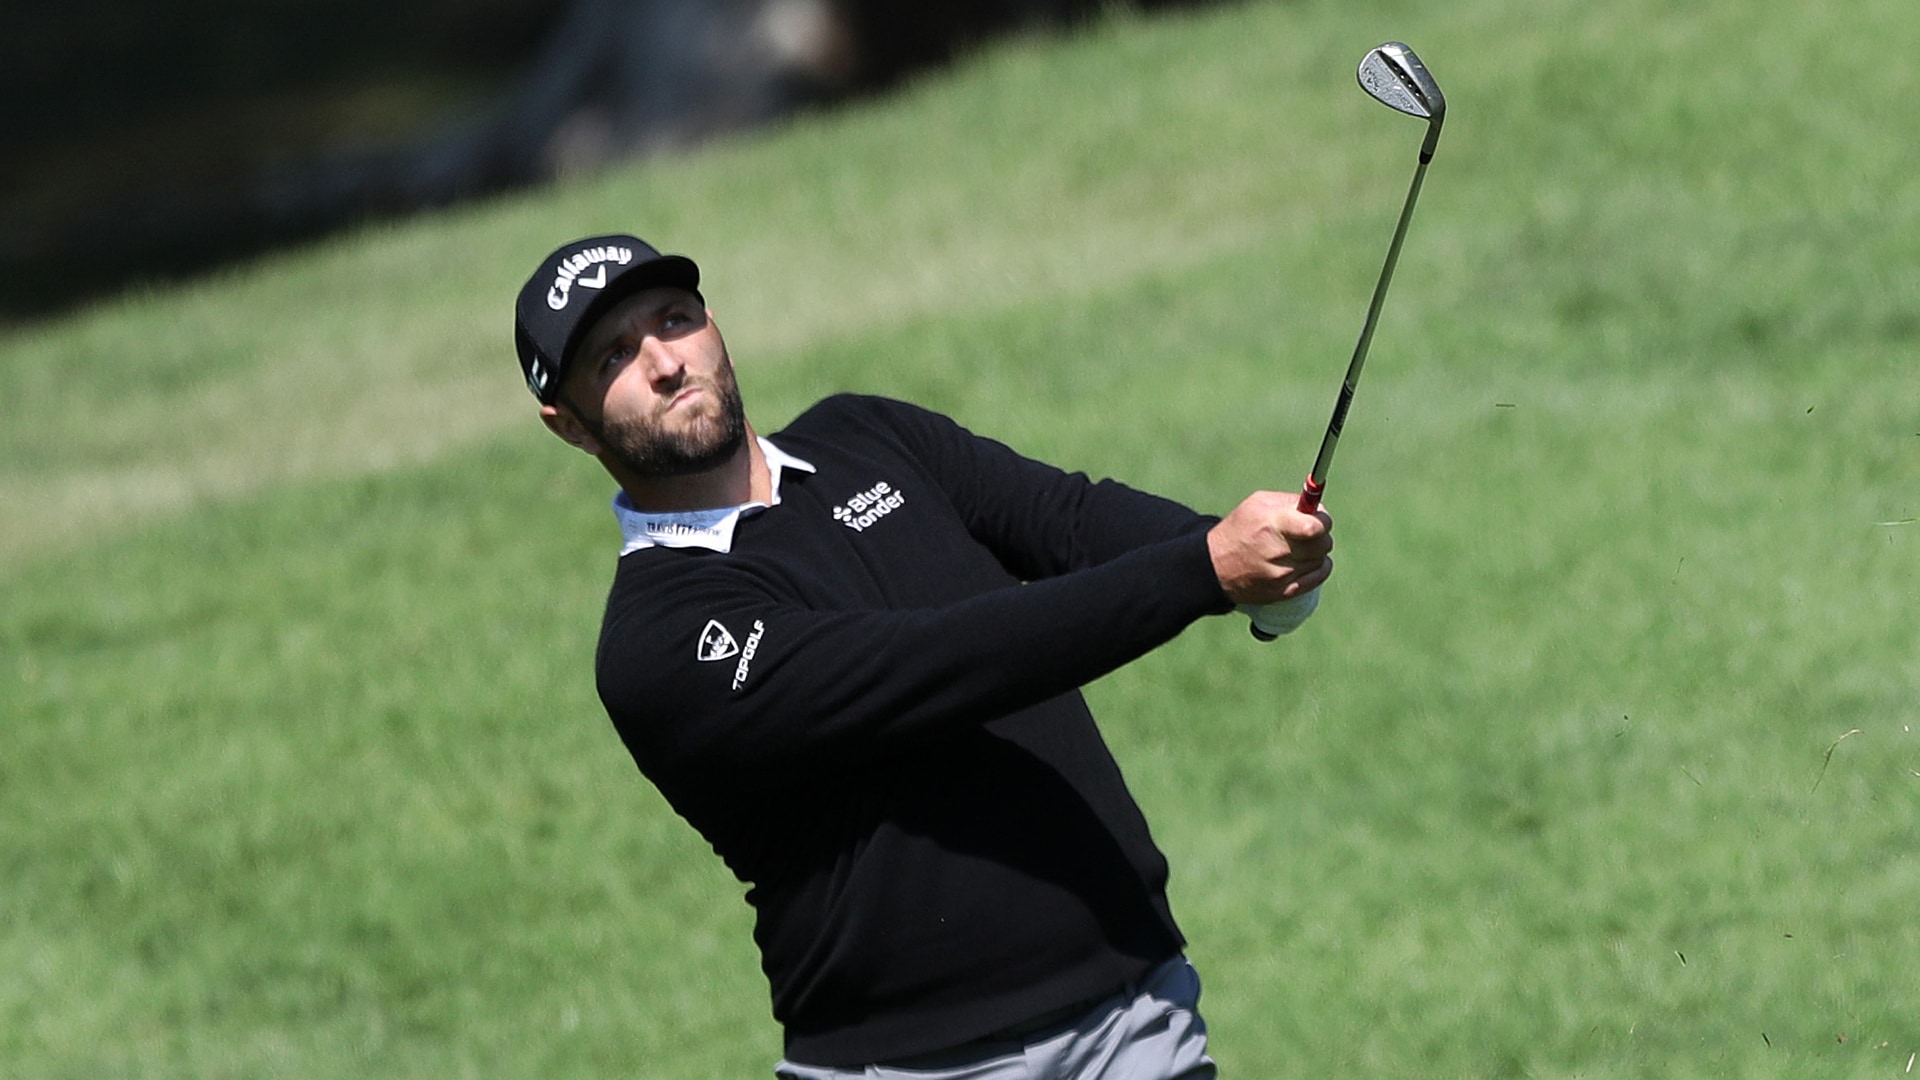 As stomach bug passes, Jon Rahm returns to action for Ryder Cup tune-up